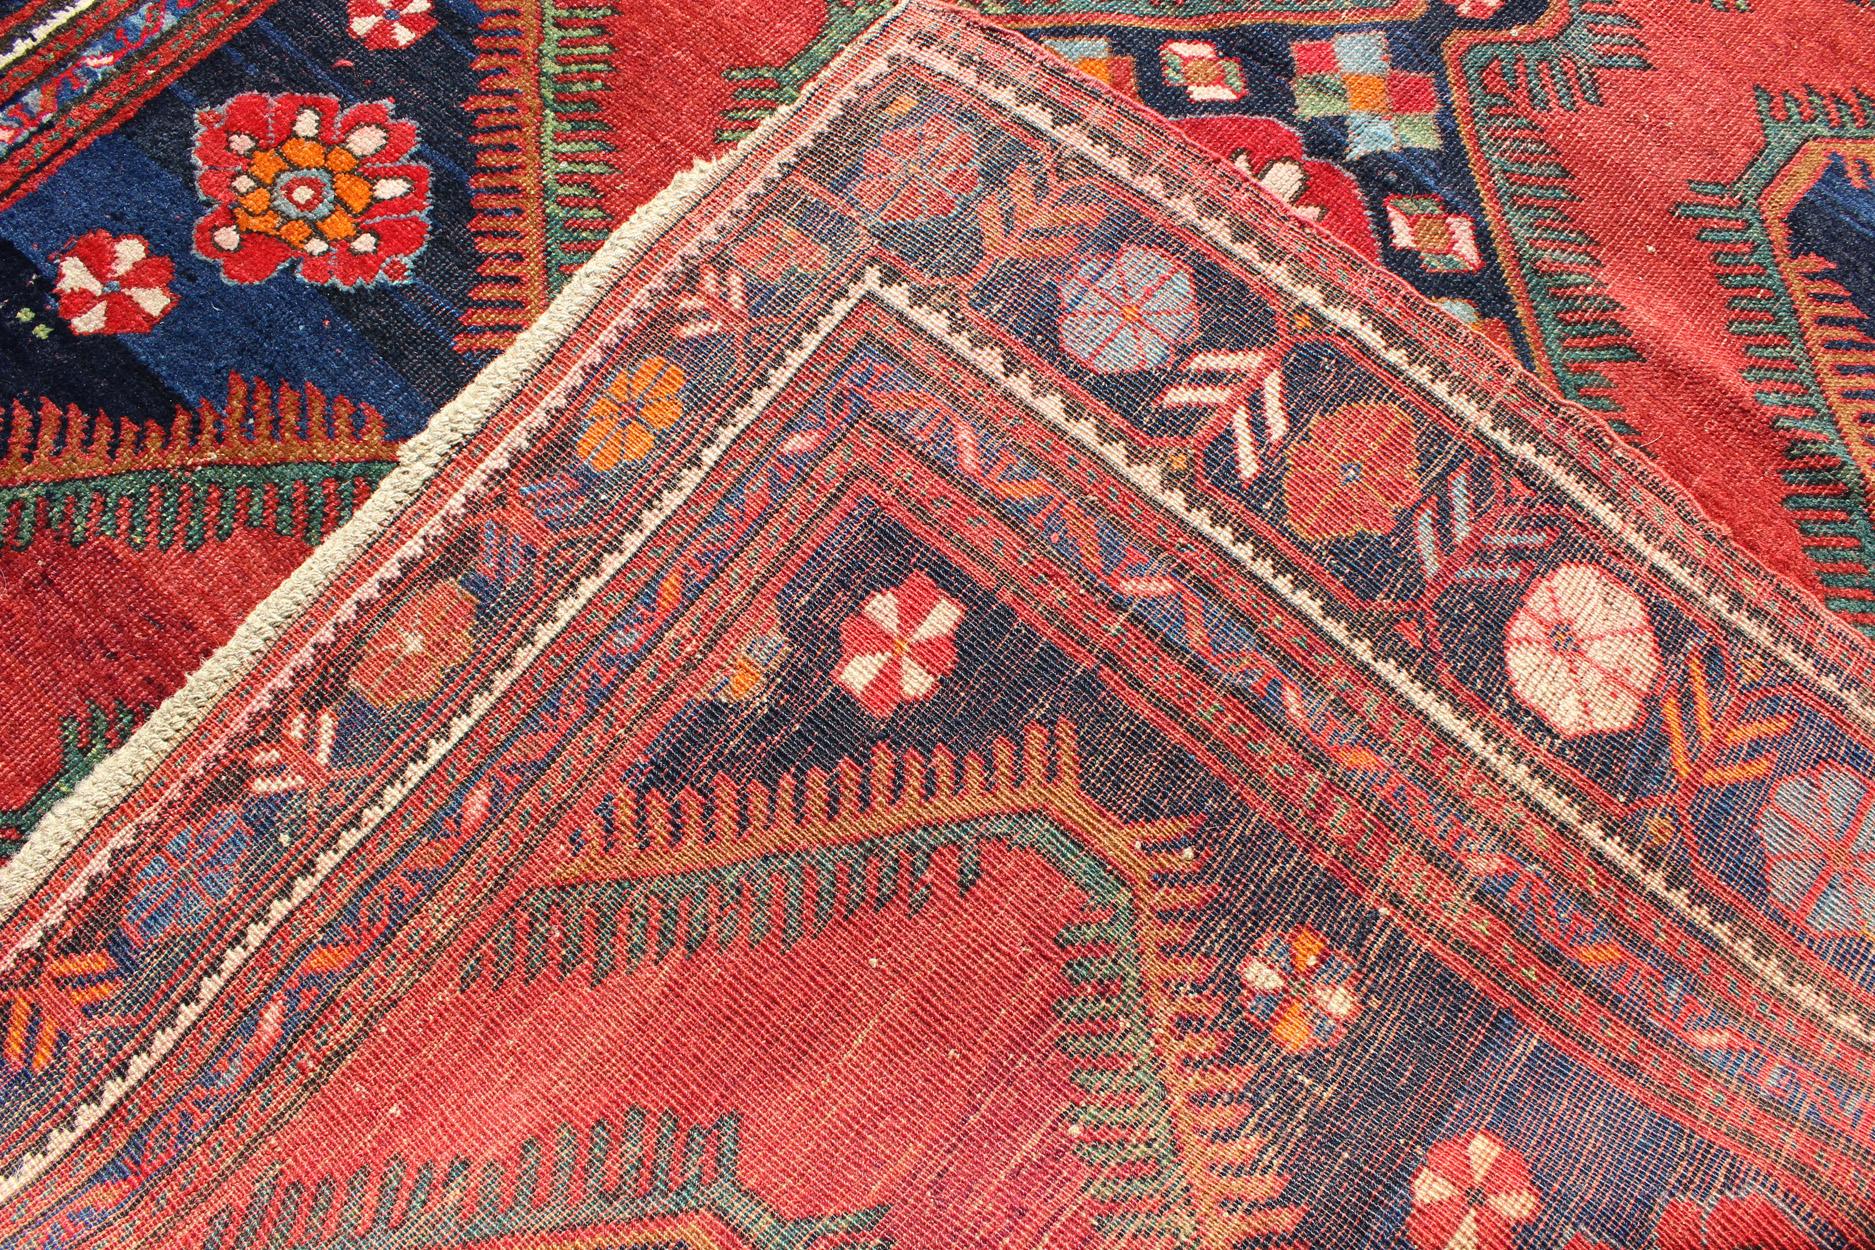 Armenian Antique Caucasian Karabagh Rug in Red, Navy Blue with Geometric Medallions For Sale